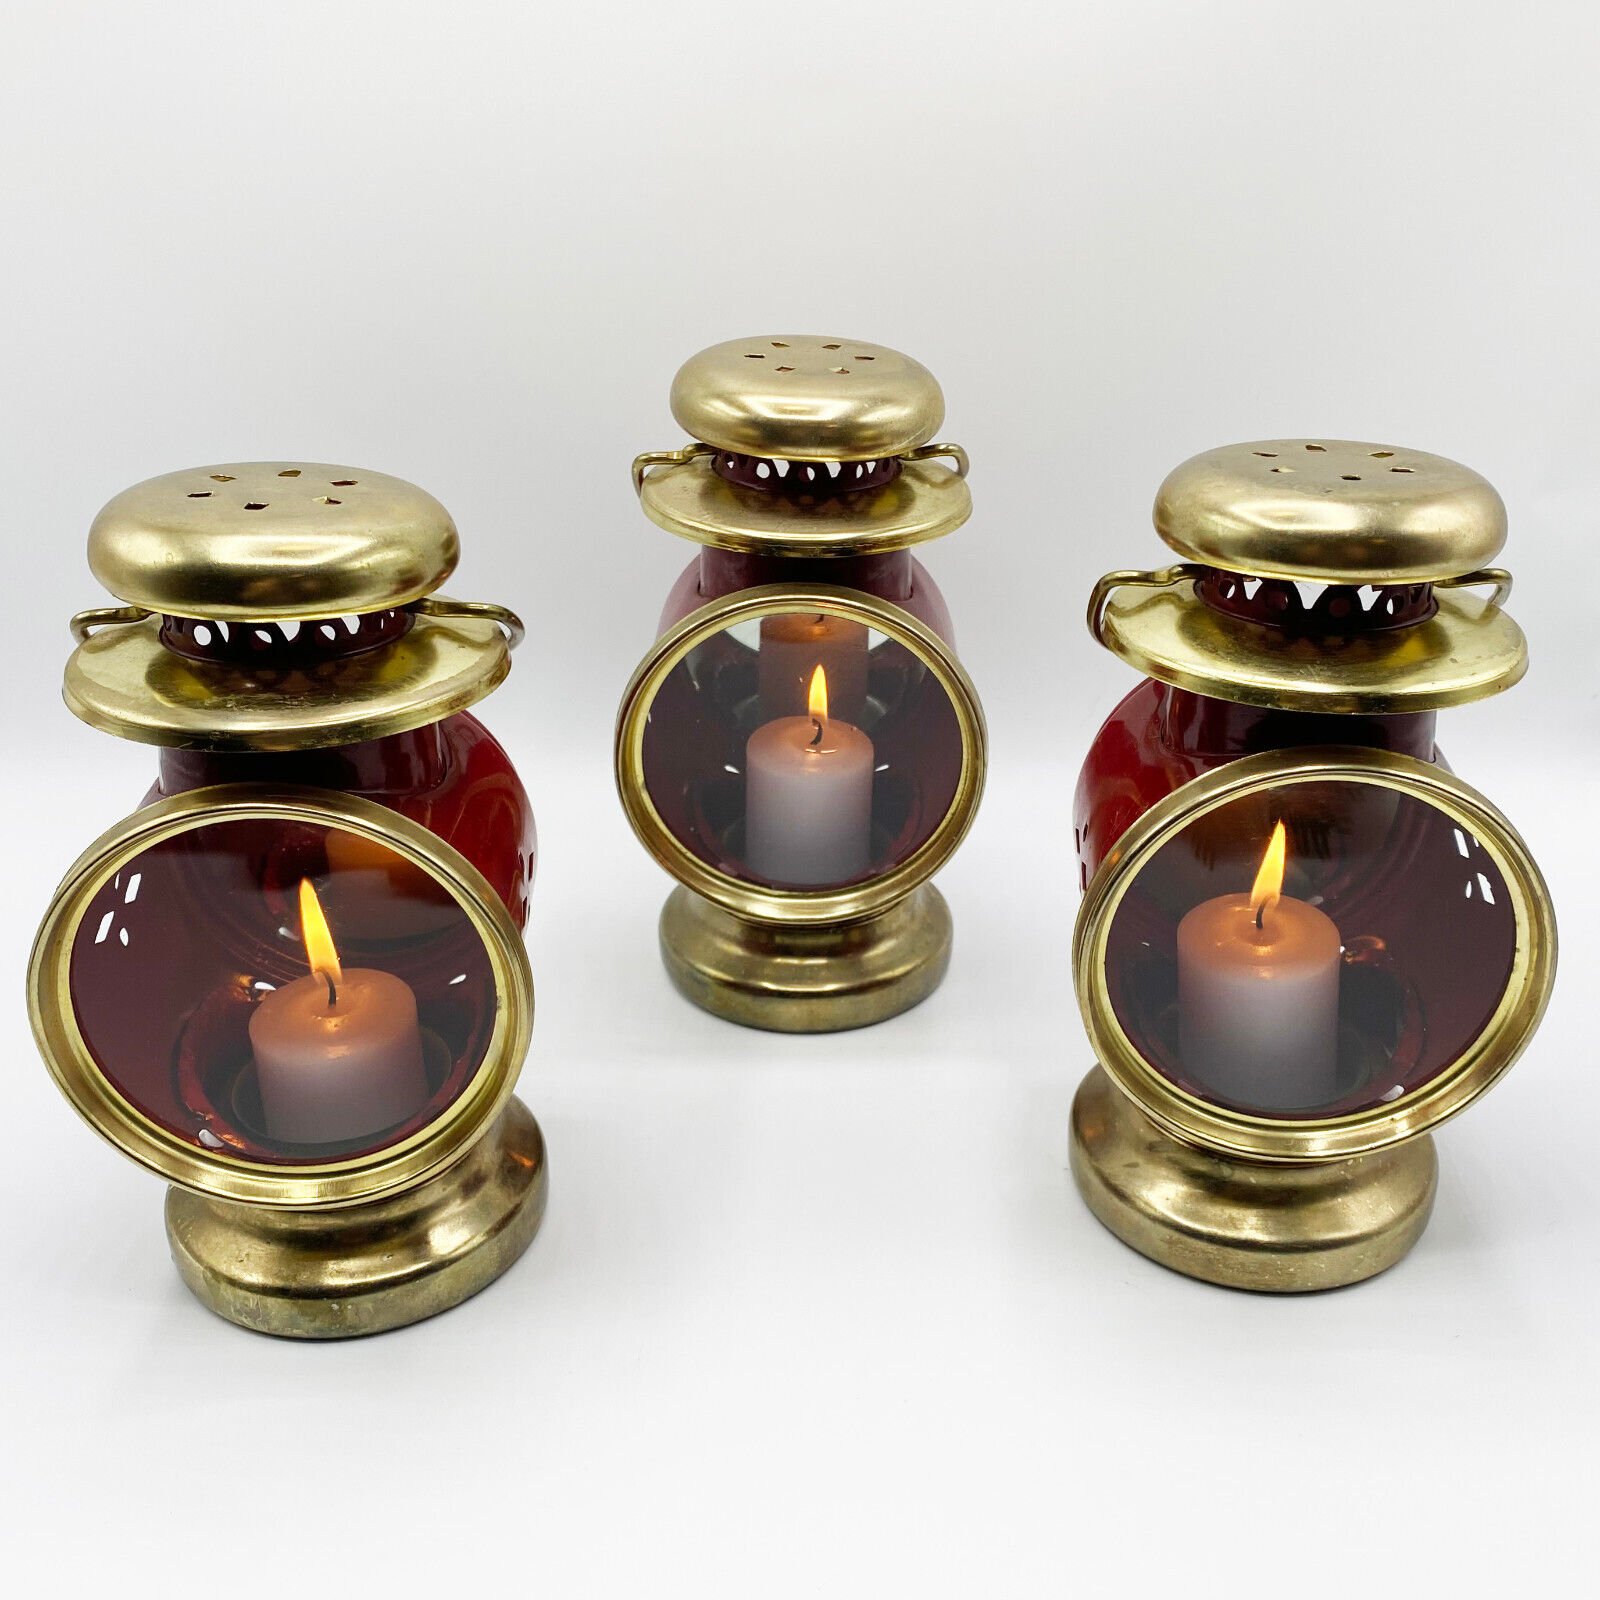 Vintage Set of 3 Red & Gold Christmas Lanterns Mirror Insets - Distressed Finish